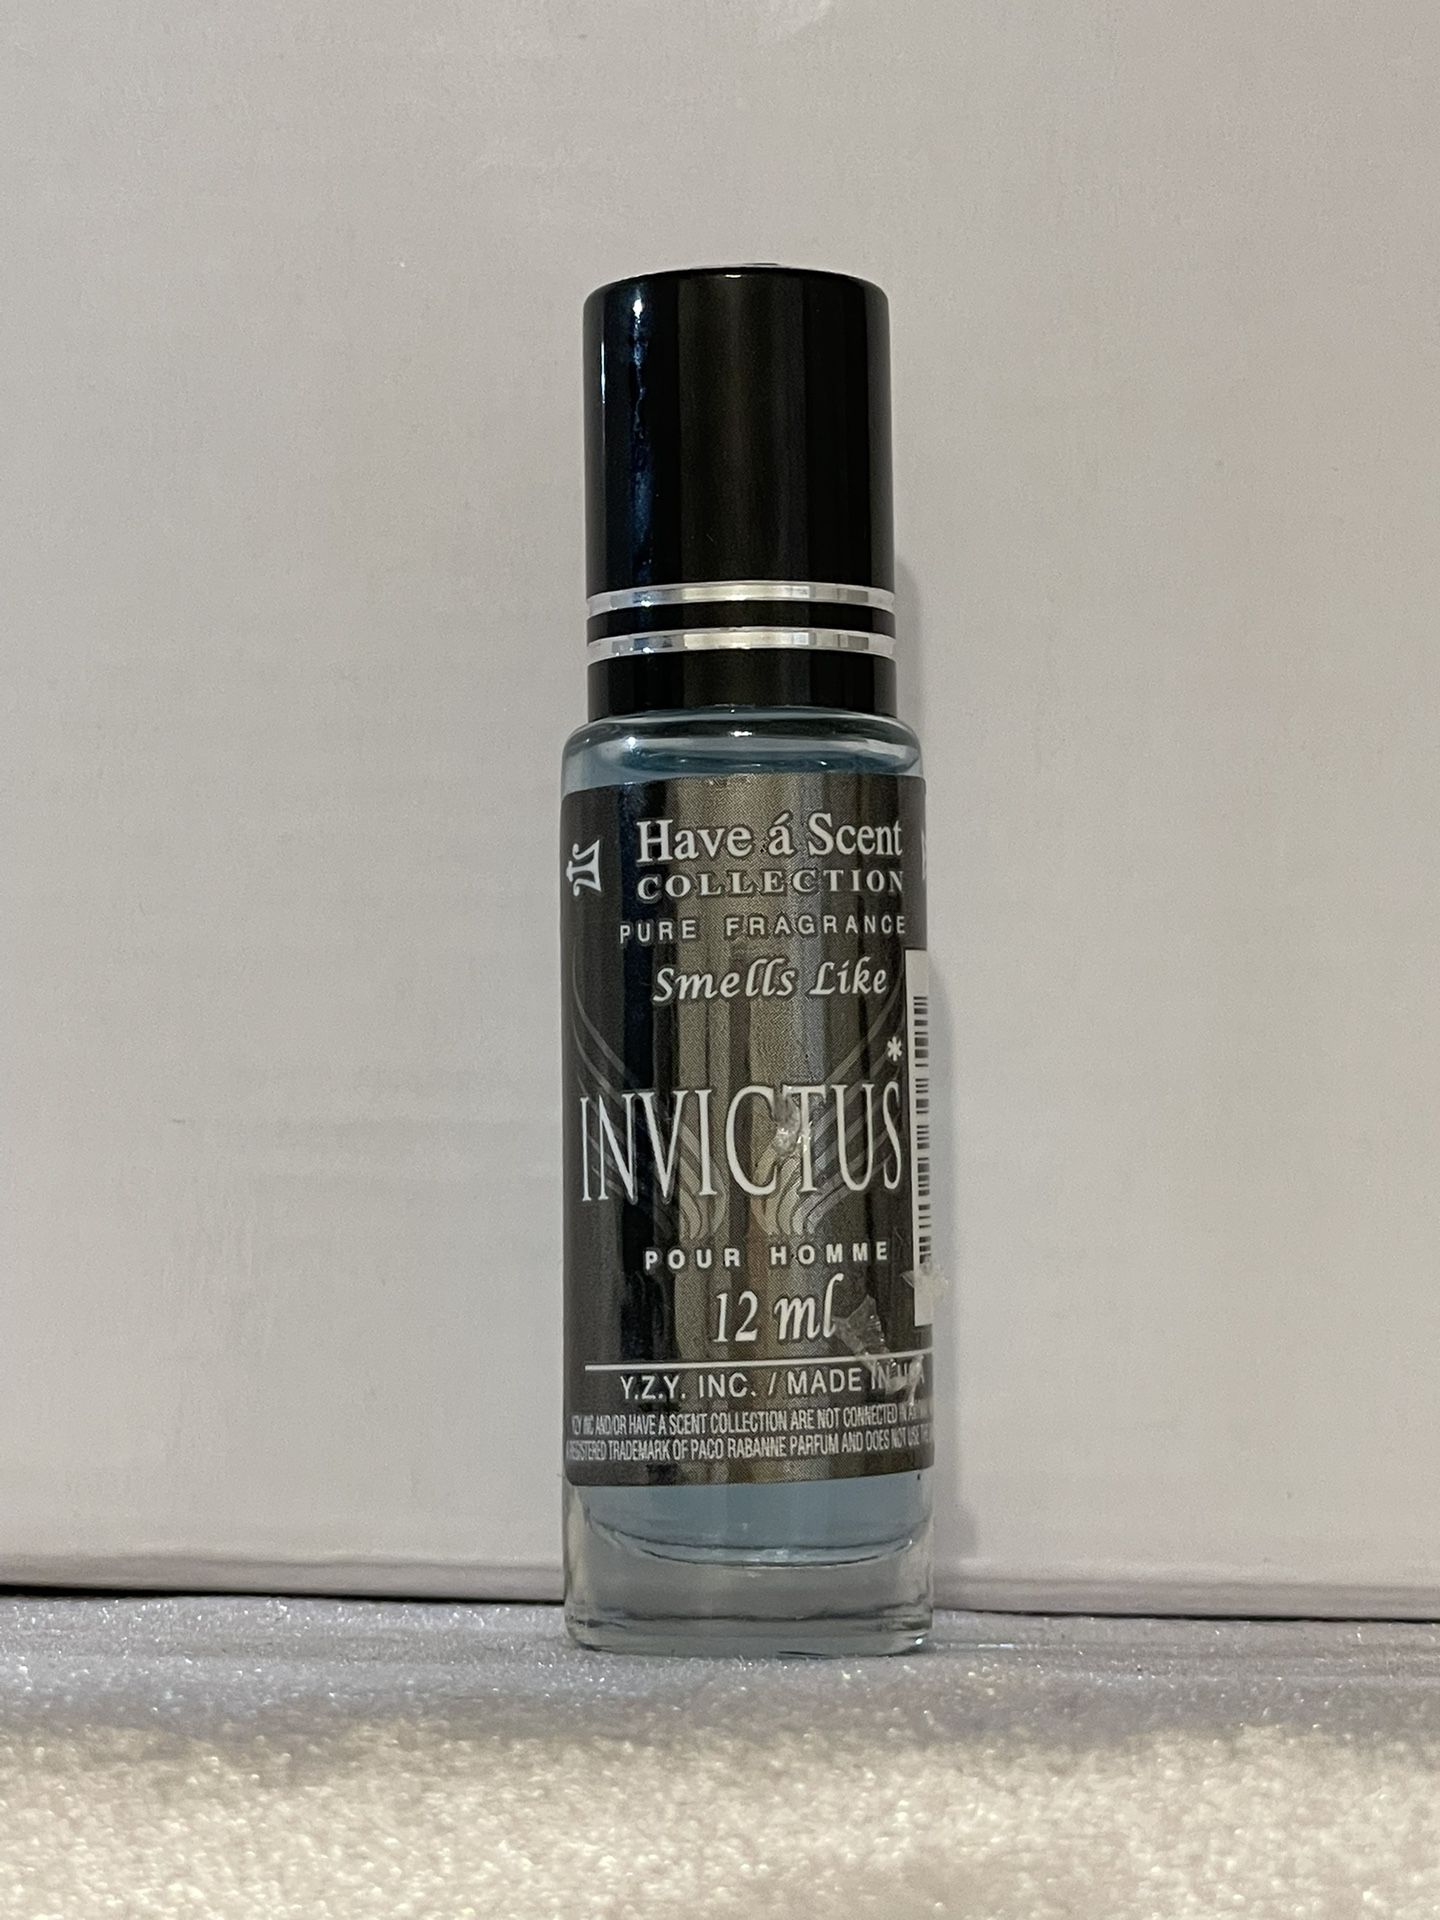 Travel Sized Perfume Invictus Have A Scent Smells Amazing 